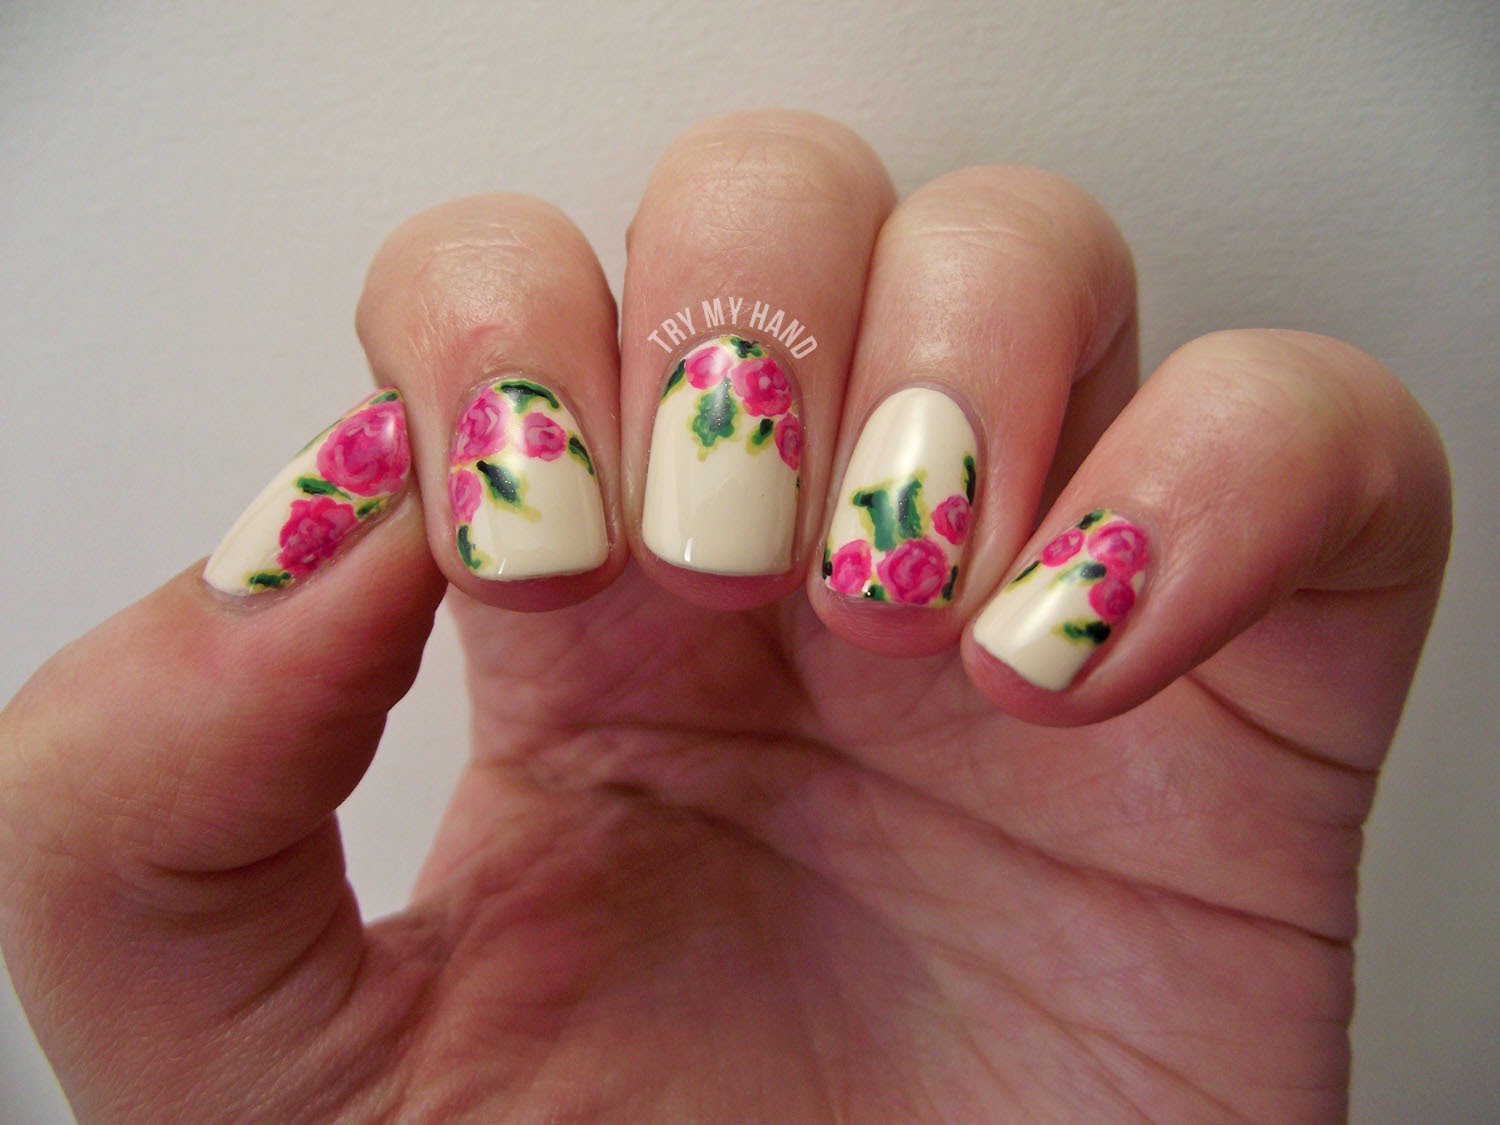 9. "Edgy Floral Nail Art Designs for a Feminine Touch" - wide 3